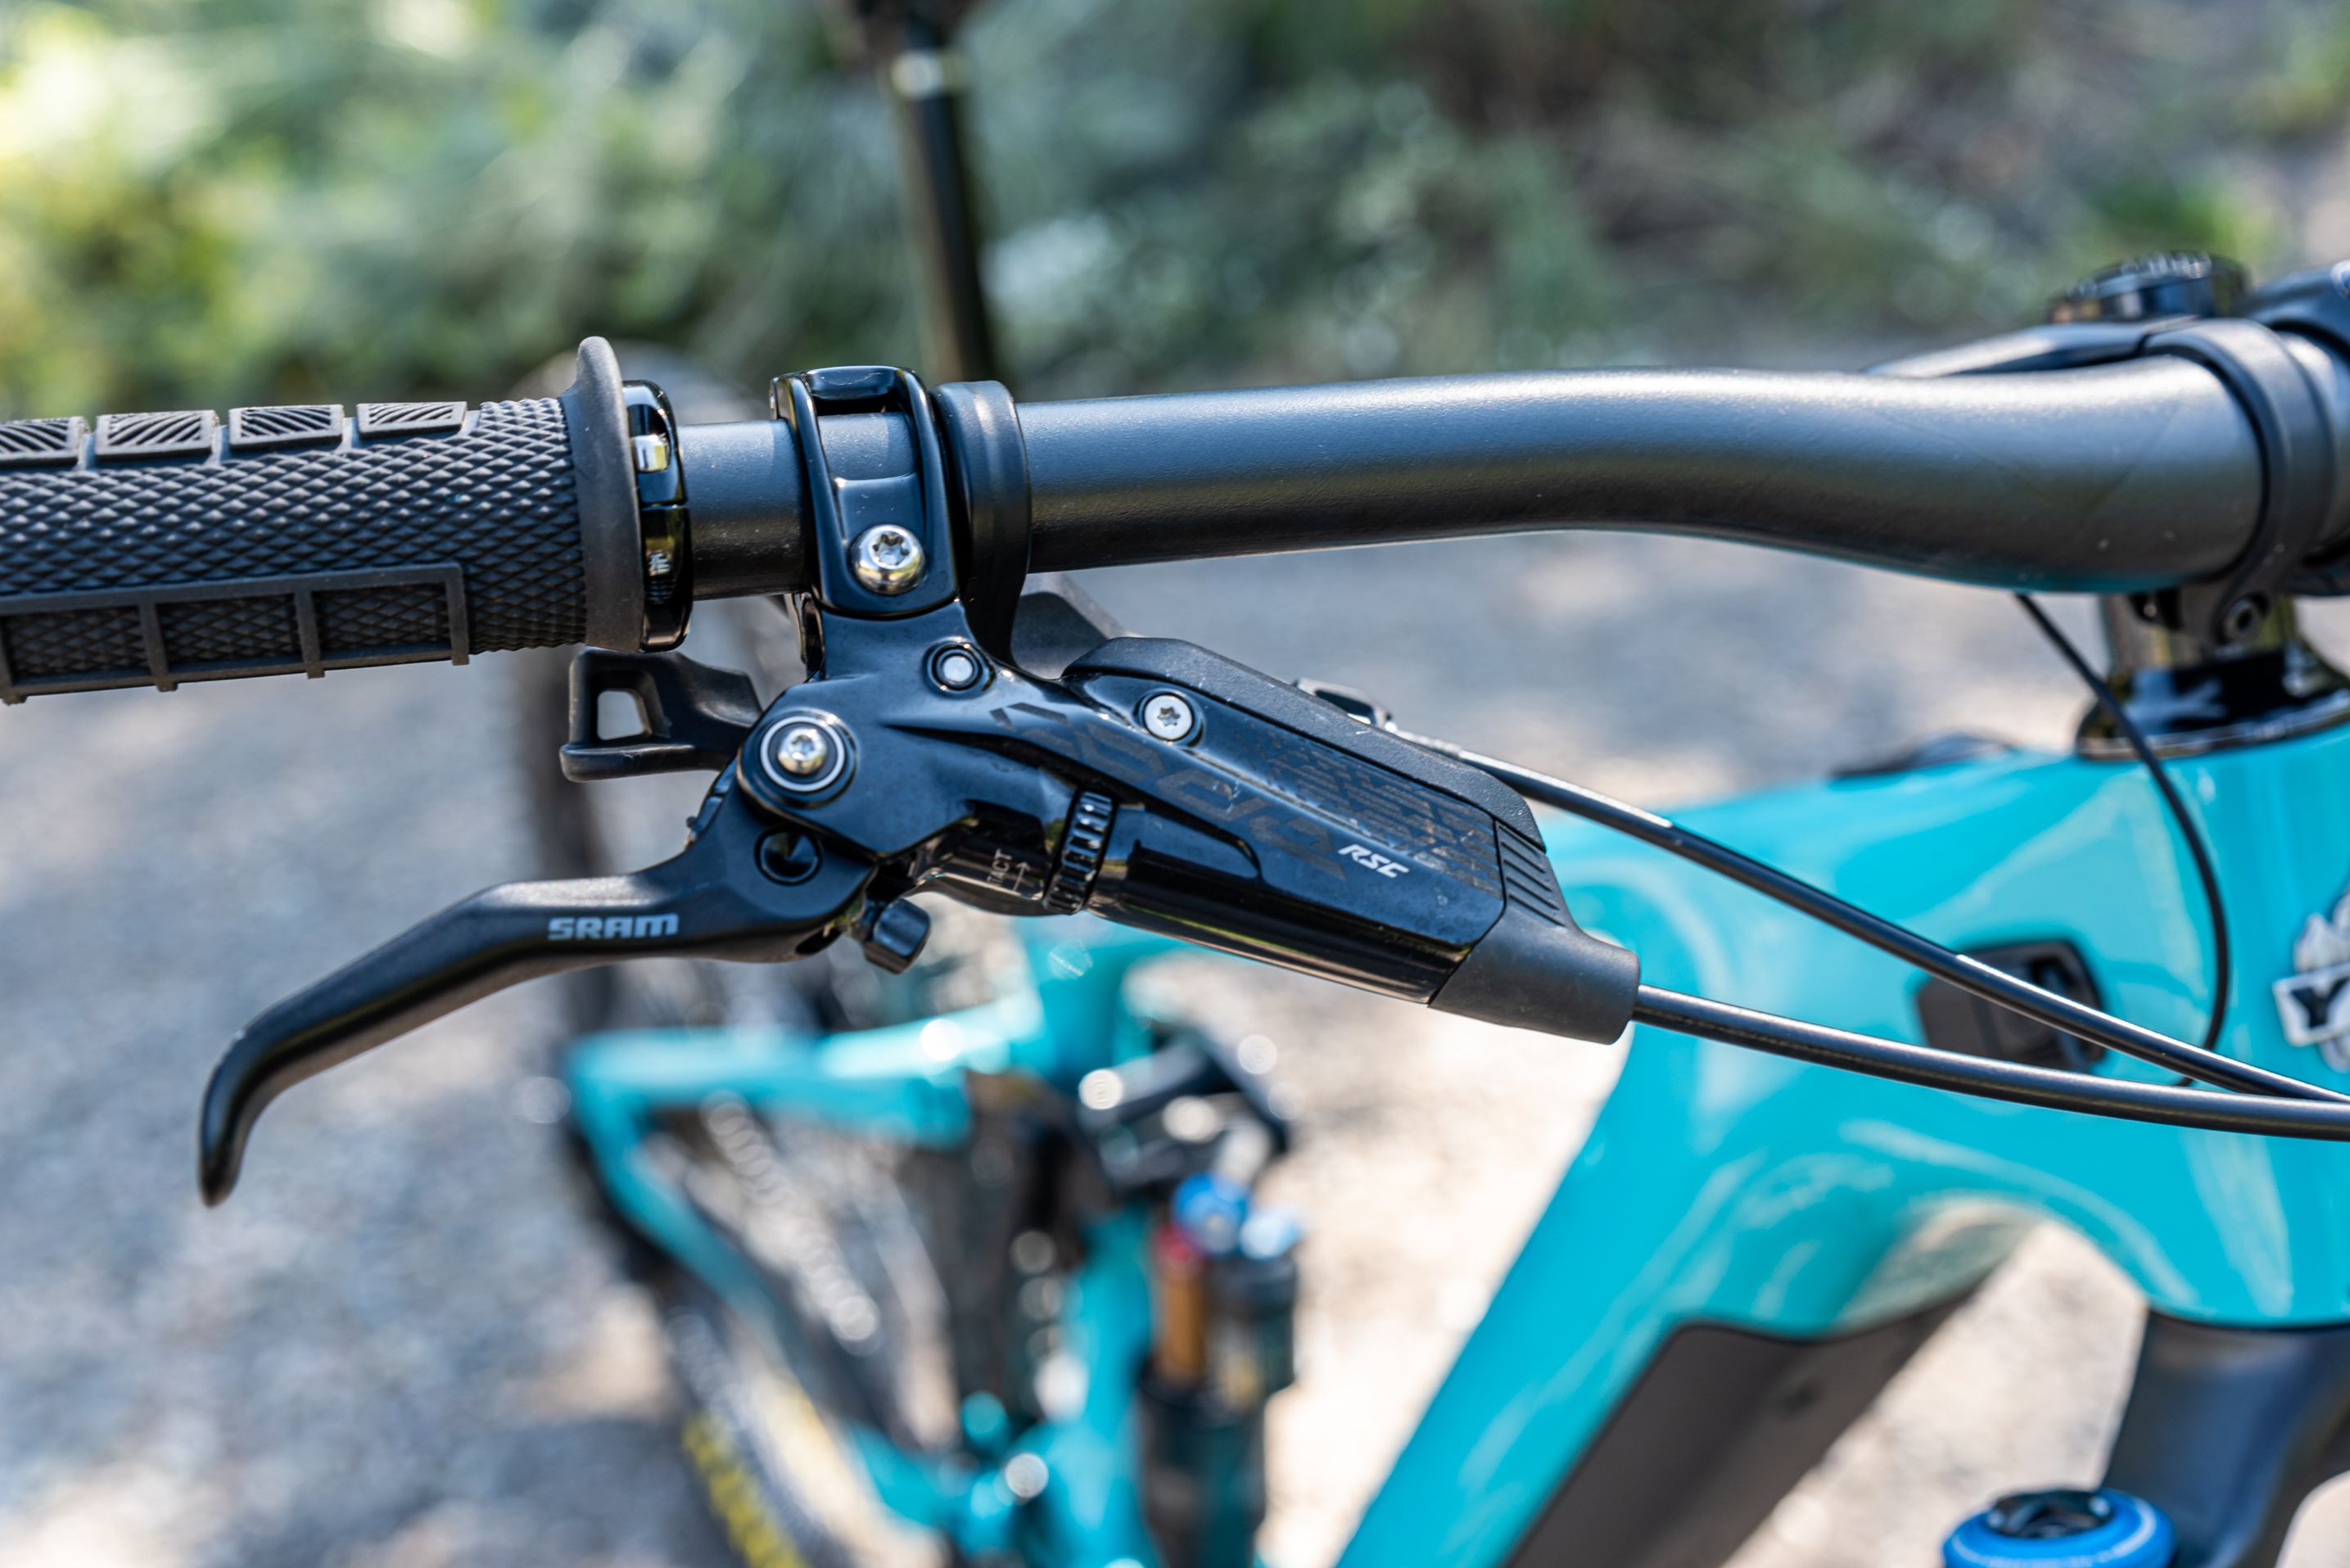 Yeti’s thermoplastic bar cuts down on vibration, the company claims. 